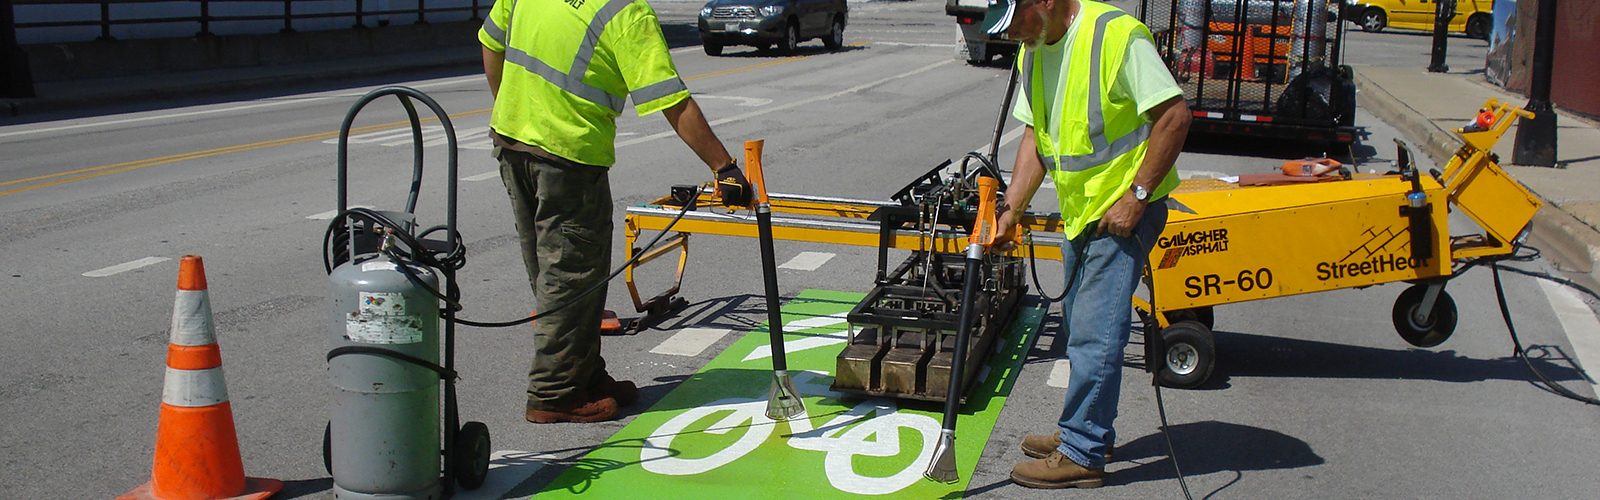 Construction workers in street with construction equipment surrounding as they install green mike symbol marking.